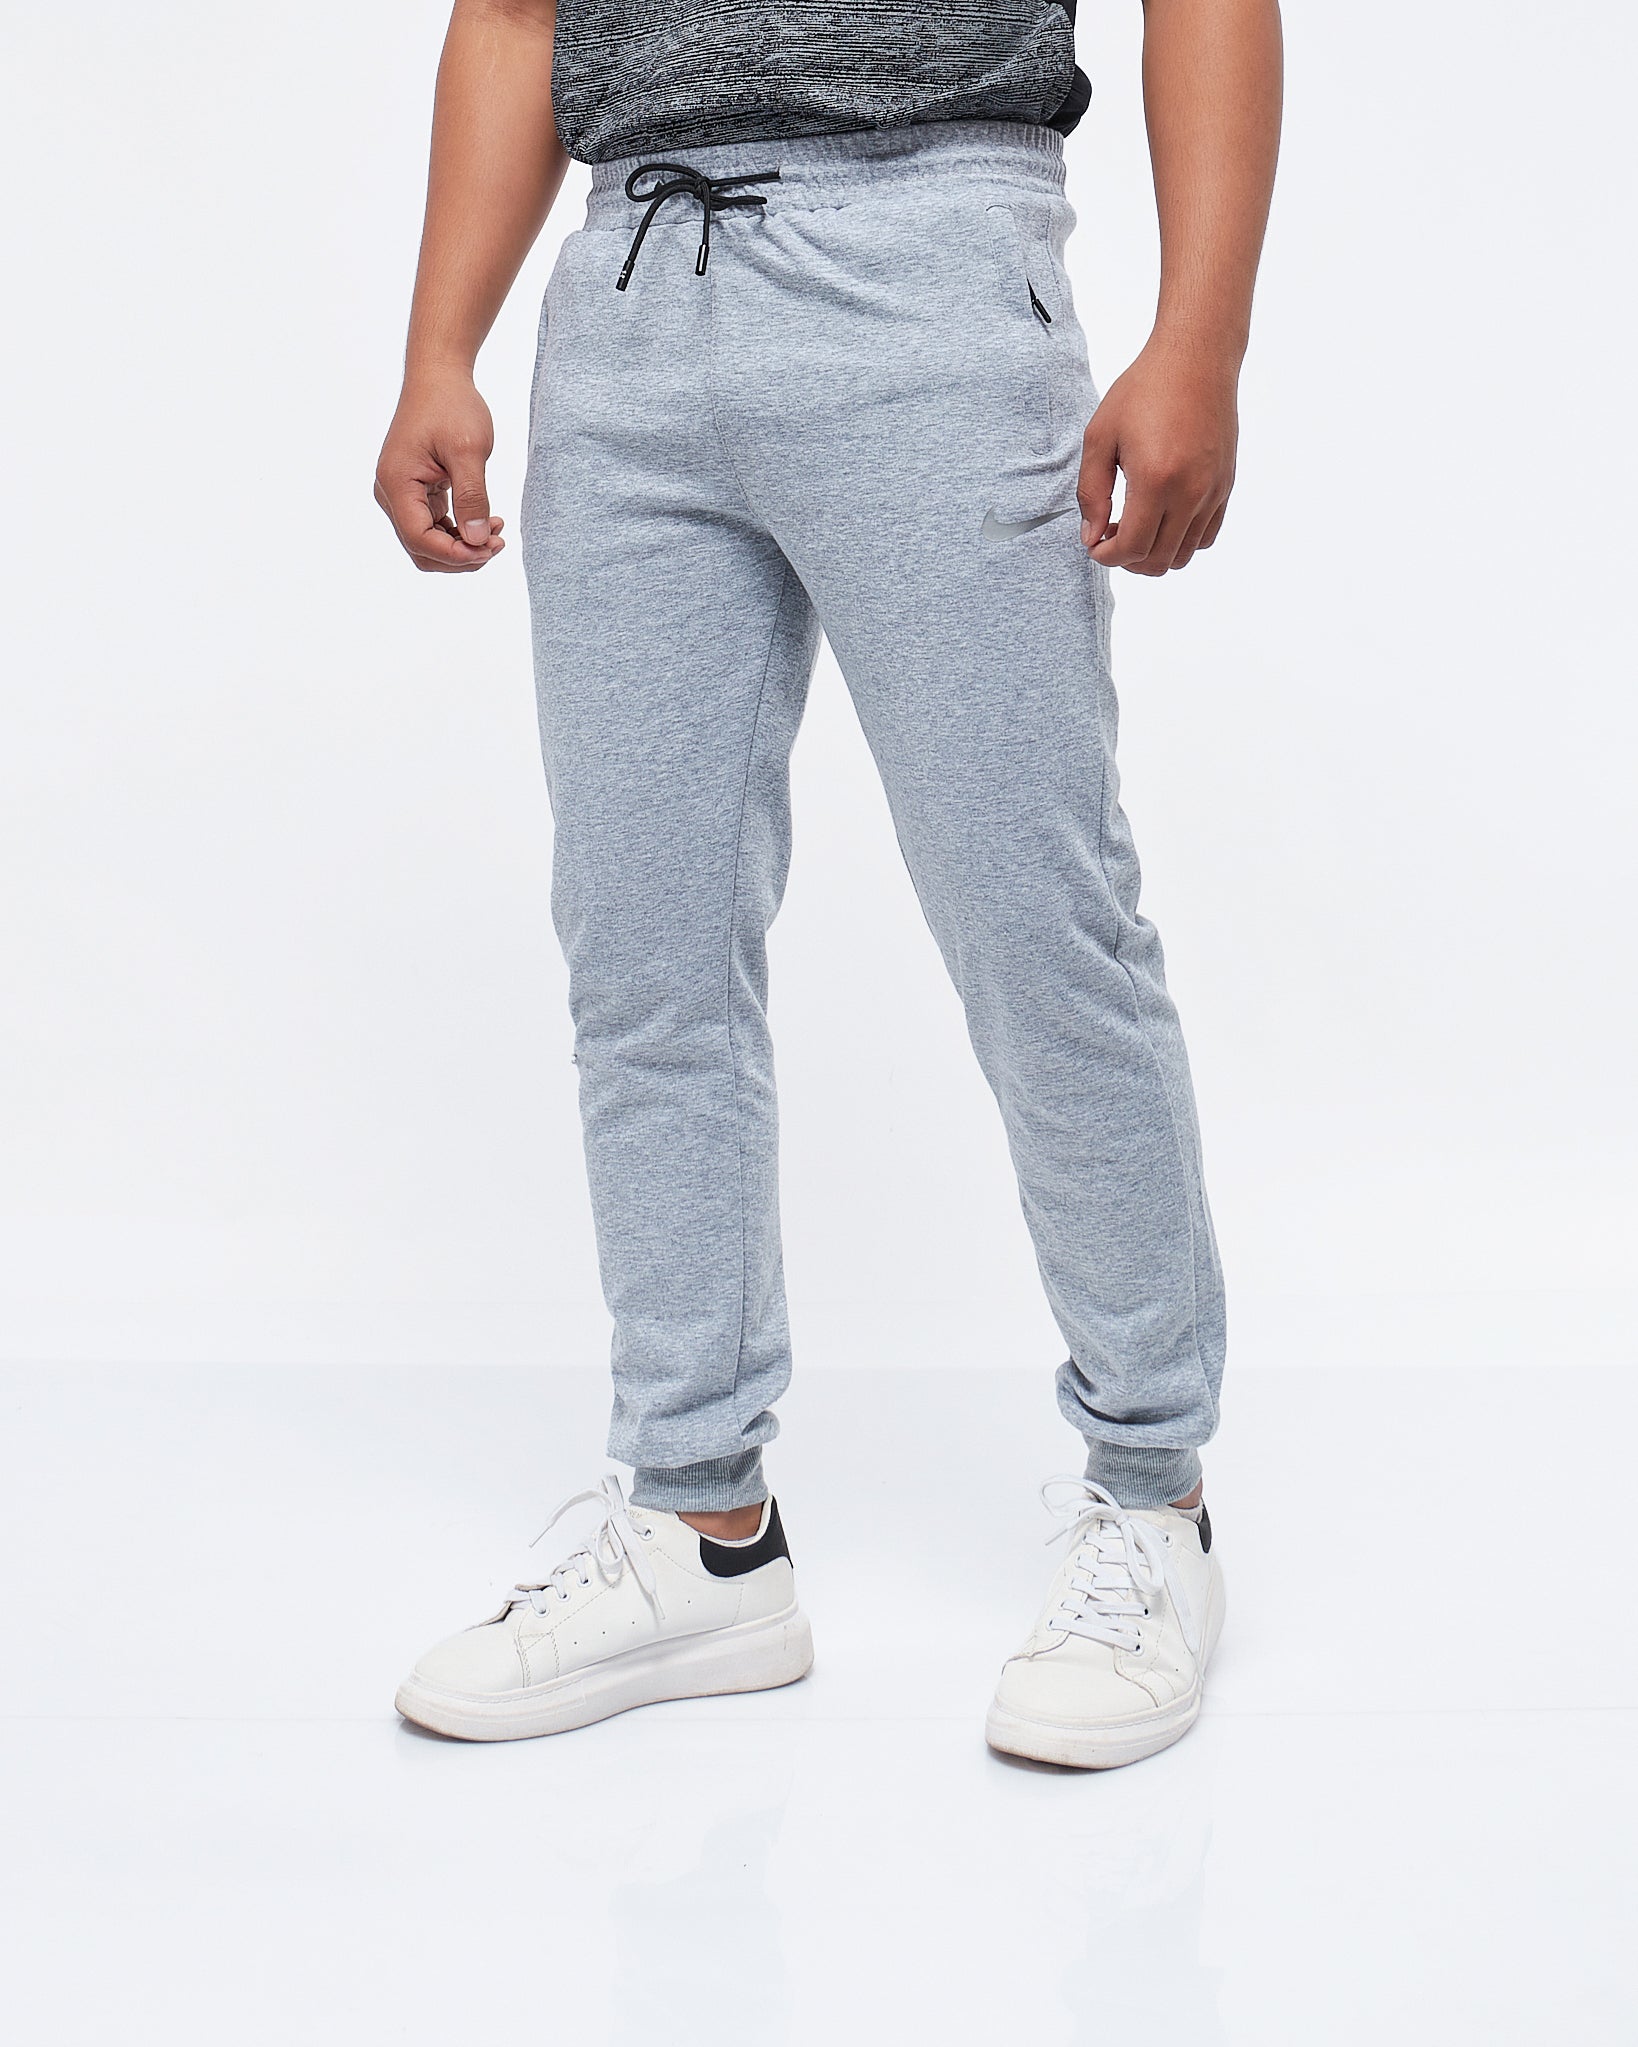 MOI OUTFIT-Small Swooh Printed Men Joggers 15.90